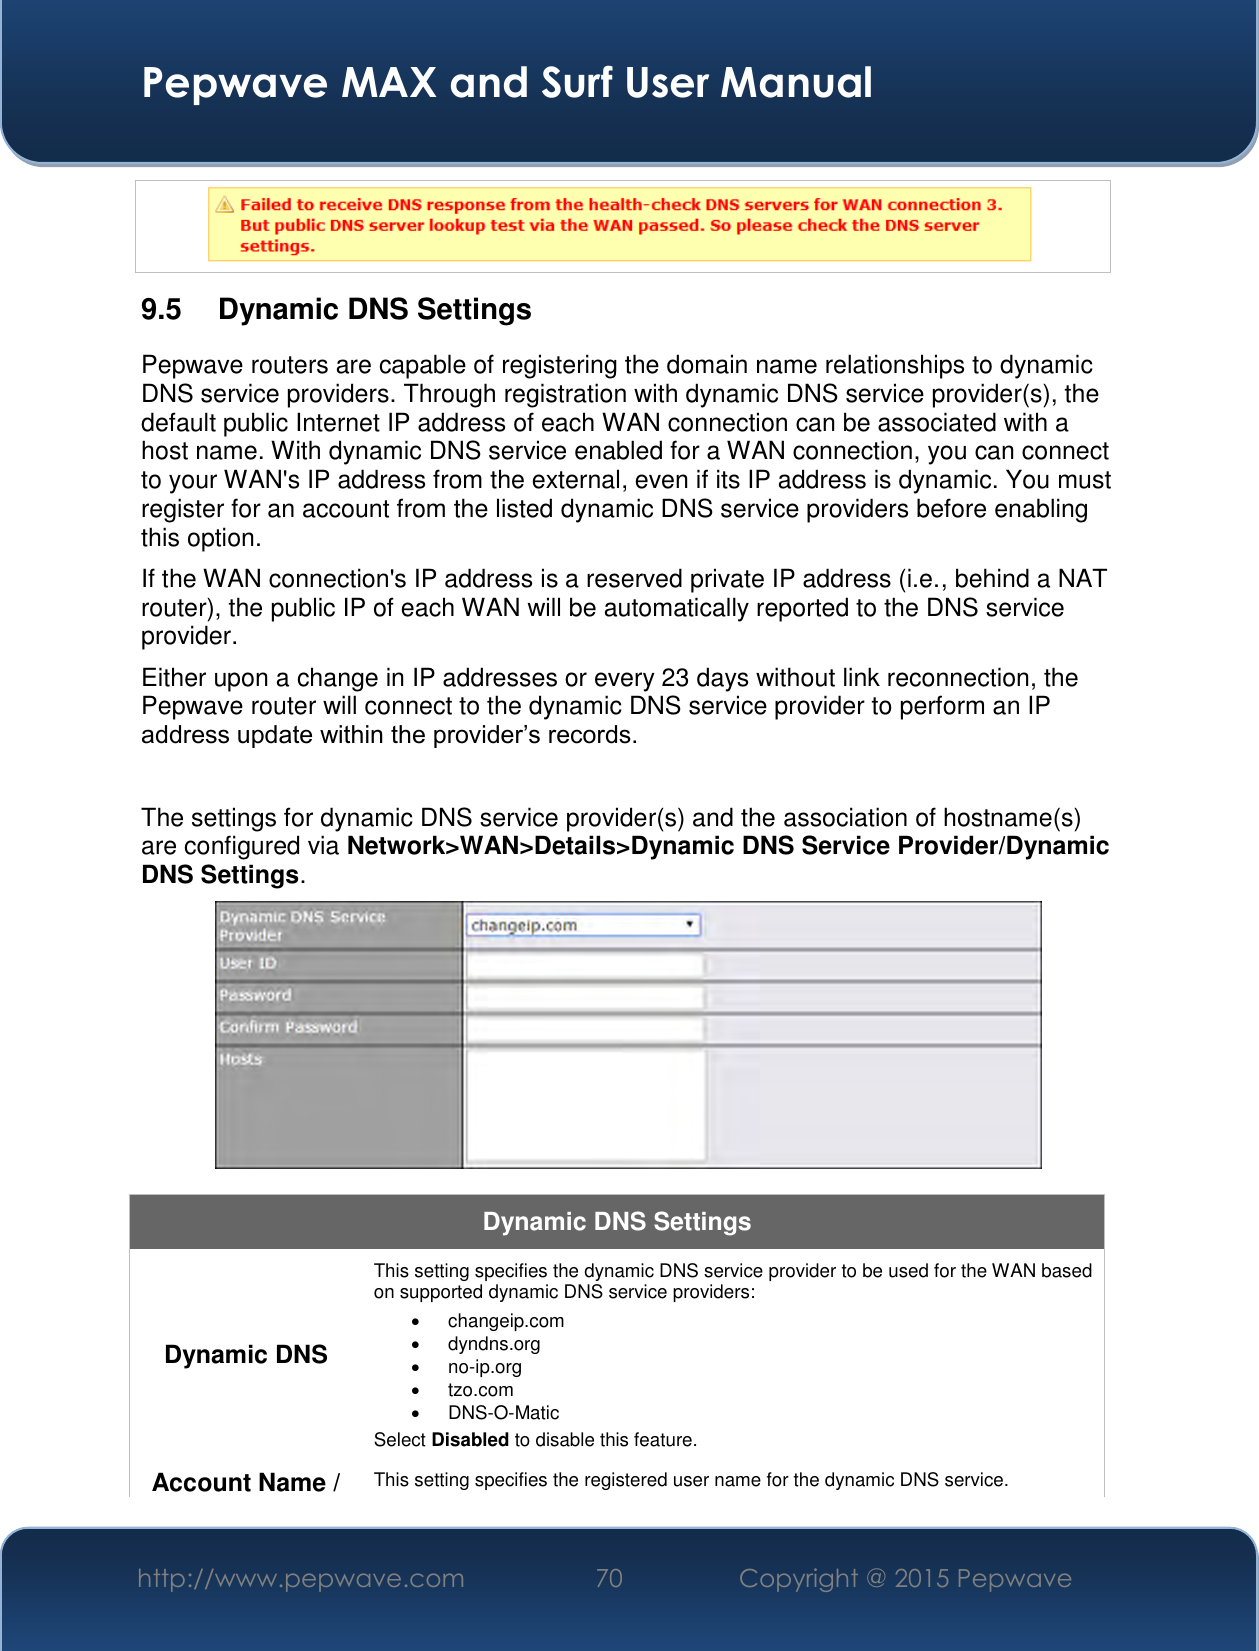  Pepwave MAX and Surf User Manual http://www.pepwave.com 70   Copyright @ 2015 Pepwave    9.5  Dynamic DNS Settings Pepwave routers are capable of registering the domain name relationships to dynamic DNS service providers. Through registration with dynamic DNS service provider(s), the default public Internet IP address of each WAN connection can be associated with a host name. With dynamic DNS service enabled for a WAN connection, you can connect to your WAN&apos;s IP address from the external, even if its IP address is dynamic. You must register for an account from the listed dynamic DNS service providers before enabling this option. If the WAN connection&apos;s IP address is a reserved private IP address (i.e., behind a NAT router), the public IP of each WAN will be automatically reported to the DNS service provider. Either upon a change in IP addresses or every 23 days without link reconnection, the Pepwave router will connect to the dynamic DNS service provider to perform an IP address update within the provider’s records.  The settings for dynamic DNS service provider(s) and the association of hostname(s) are configured via Network&gt;WAN&gt;Details&gt;Dynamic DNS Service Provider/Dynamic DNS Settings.  Dynamic DNS Settings Dynamic DNS This setting specifies the dynamic DNS service provider to be used for the WAN based on supported dynamic DNS service providers:   changeip.com   dyndns.org  no-ip.org   tzo.com  DNS-O-Matic Select Disabled to disable this feature. Account Name / This setting specifies the registered user name for the dynamic DNS service. 